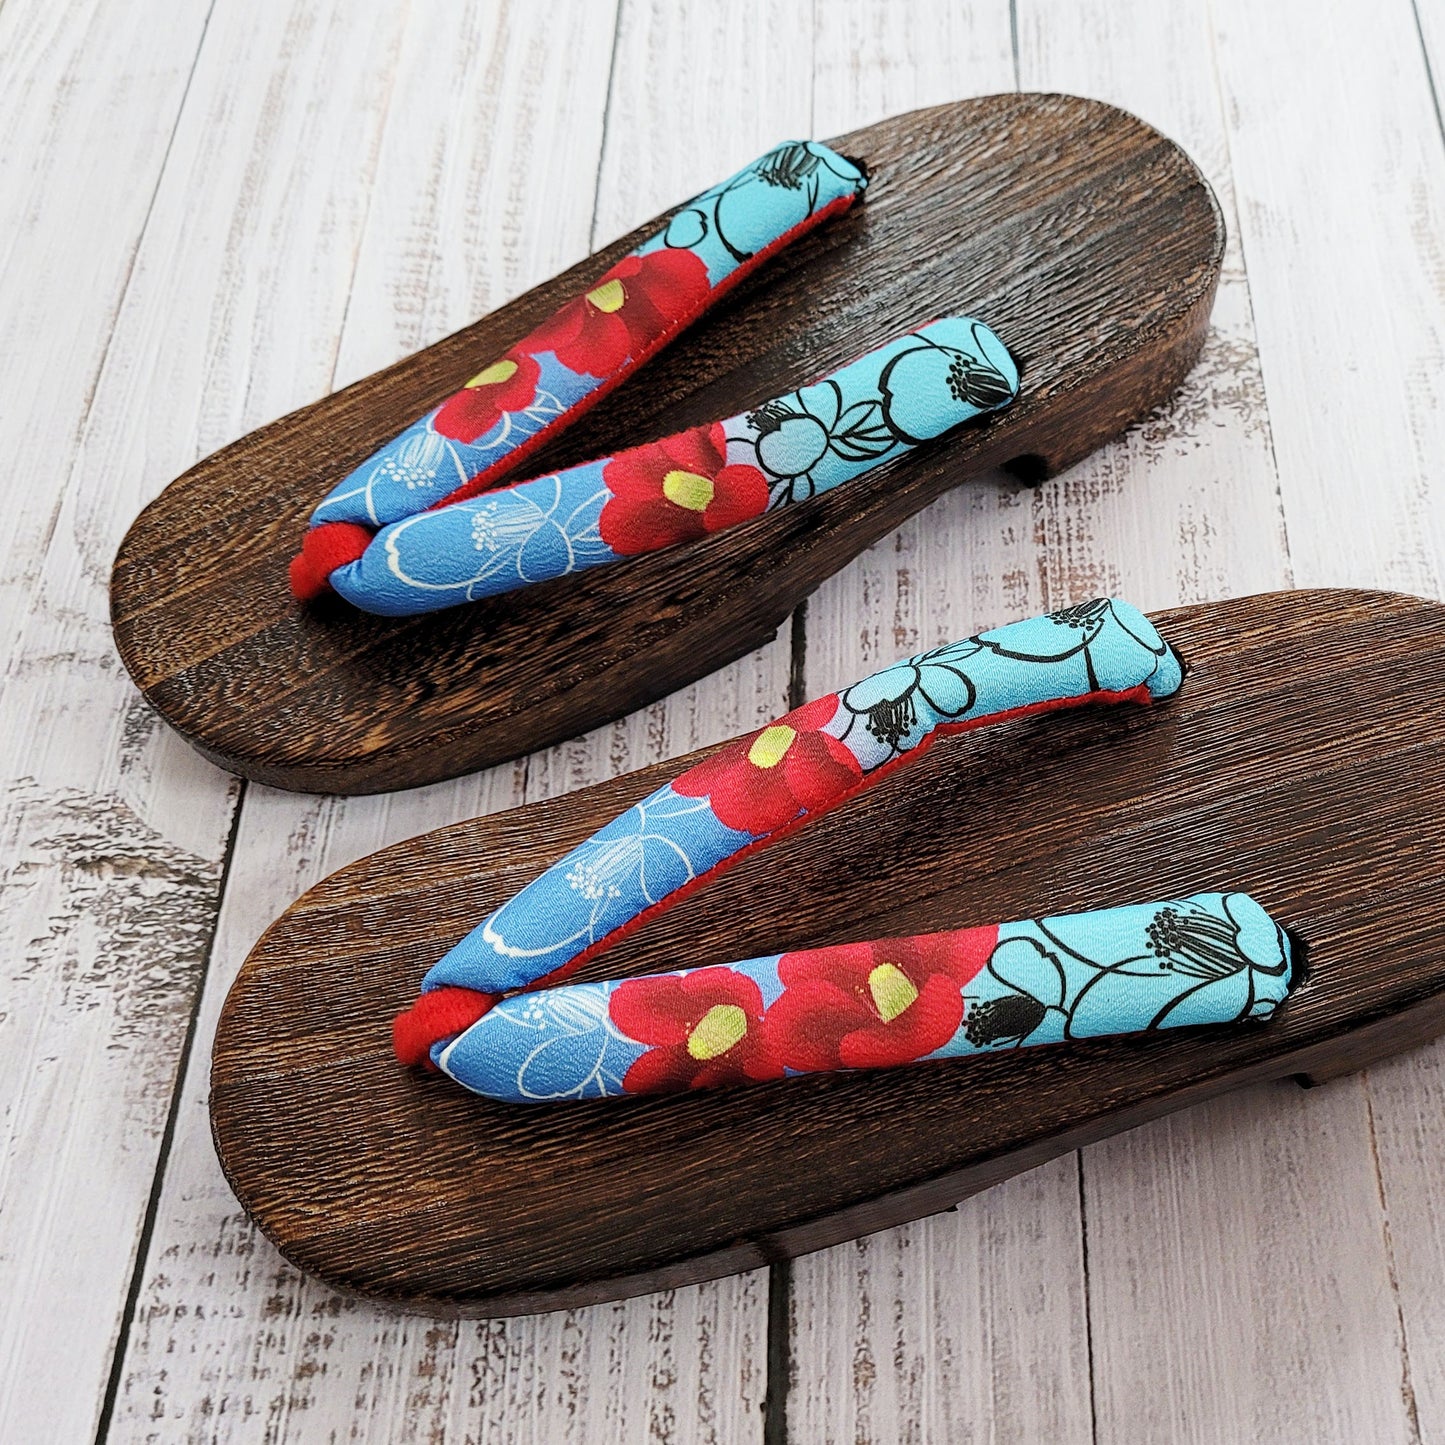 Geta Sandals with blue and red Camellia flowers